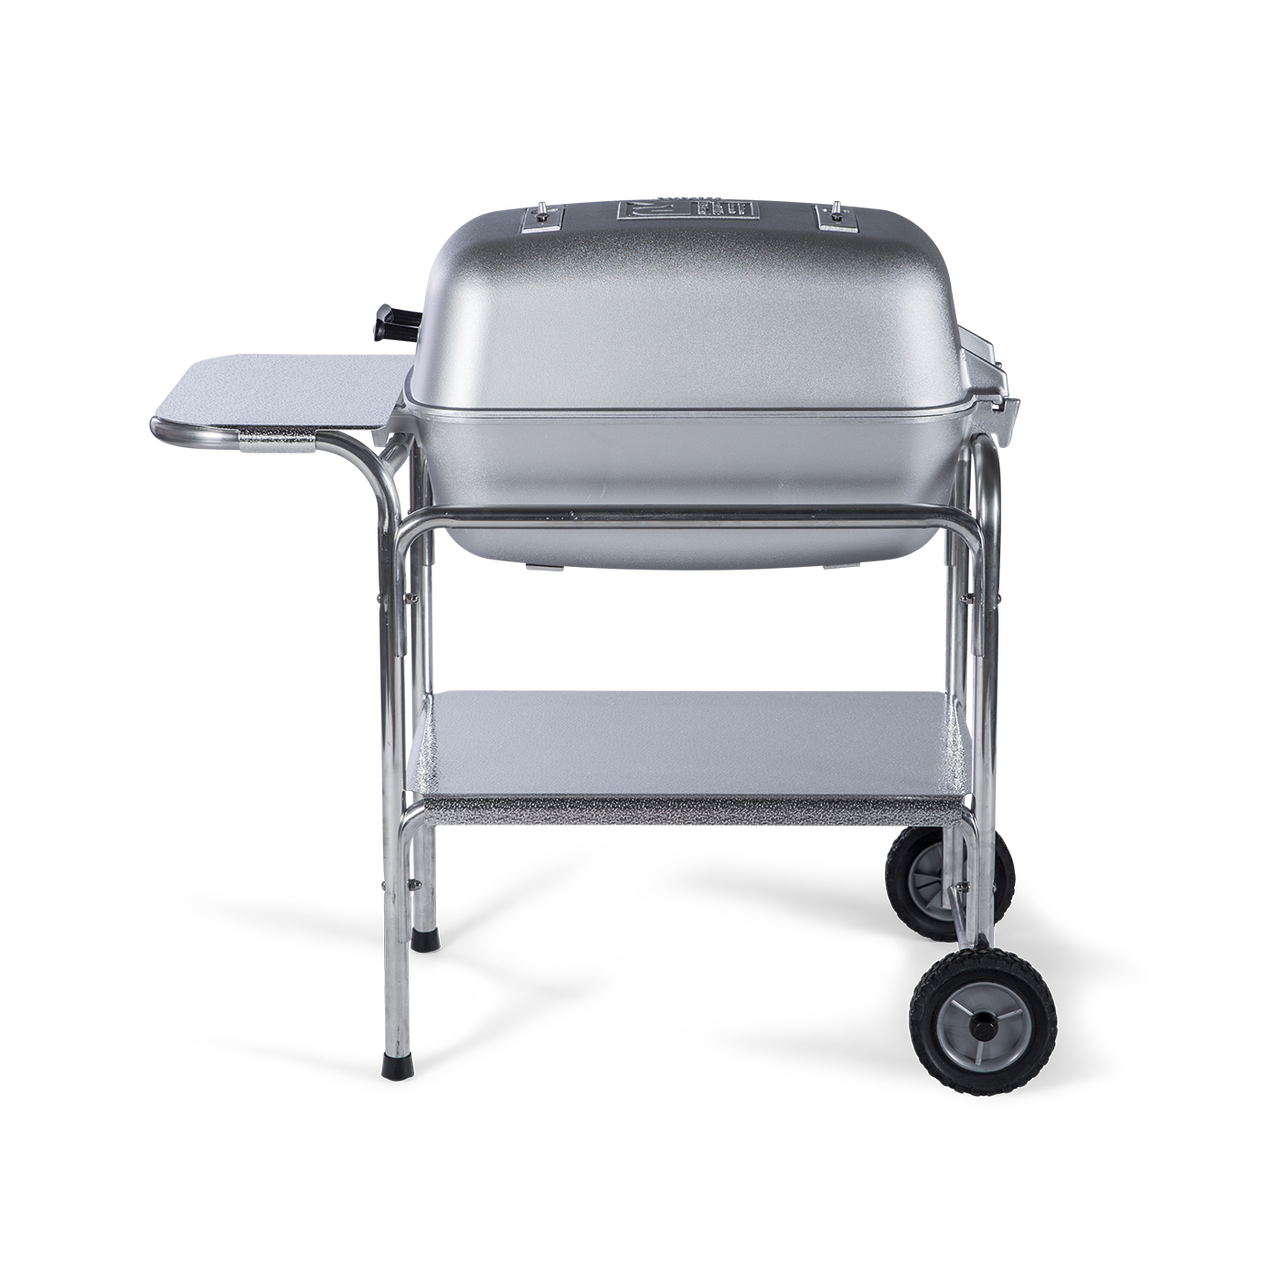 PK Grills the Original PK Grill and Smoker Silver Left View